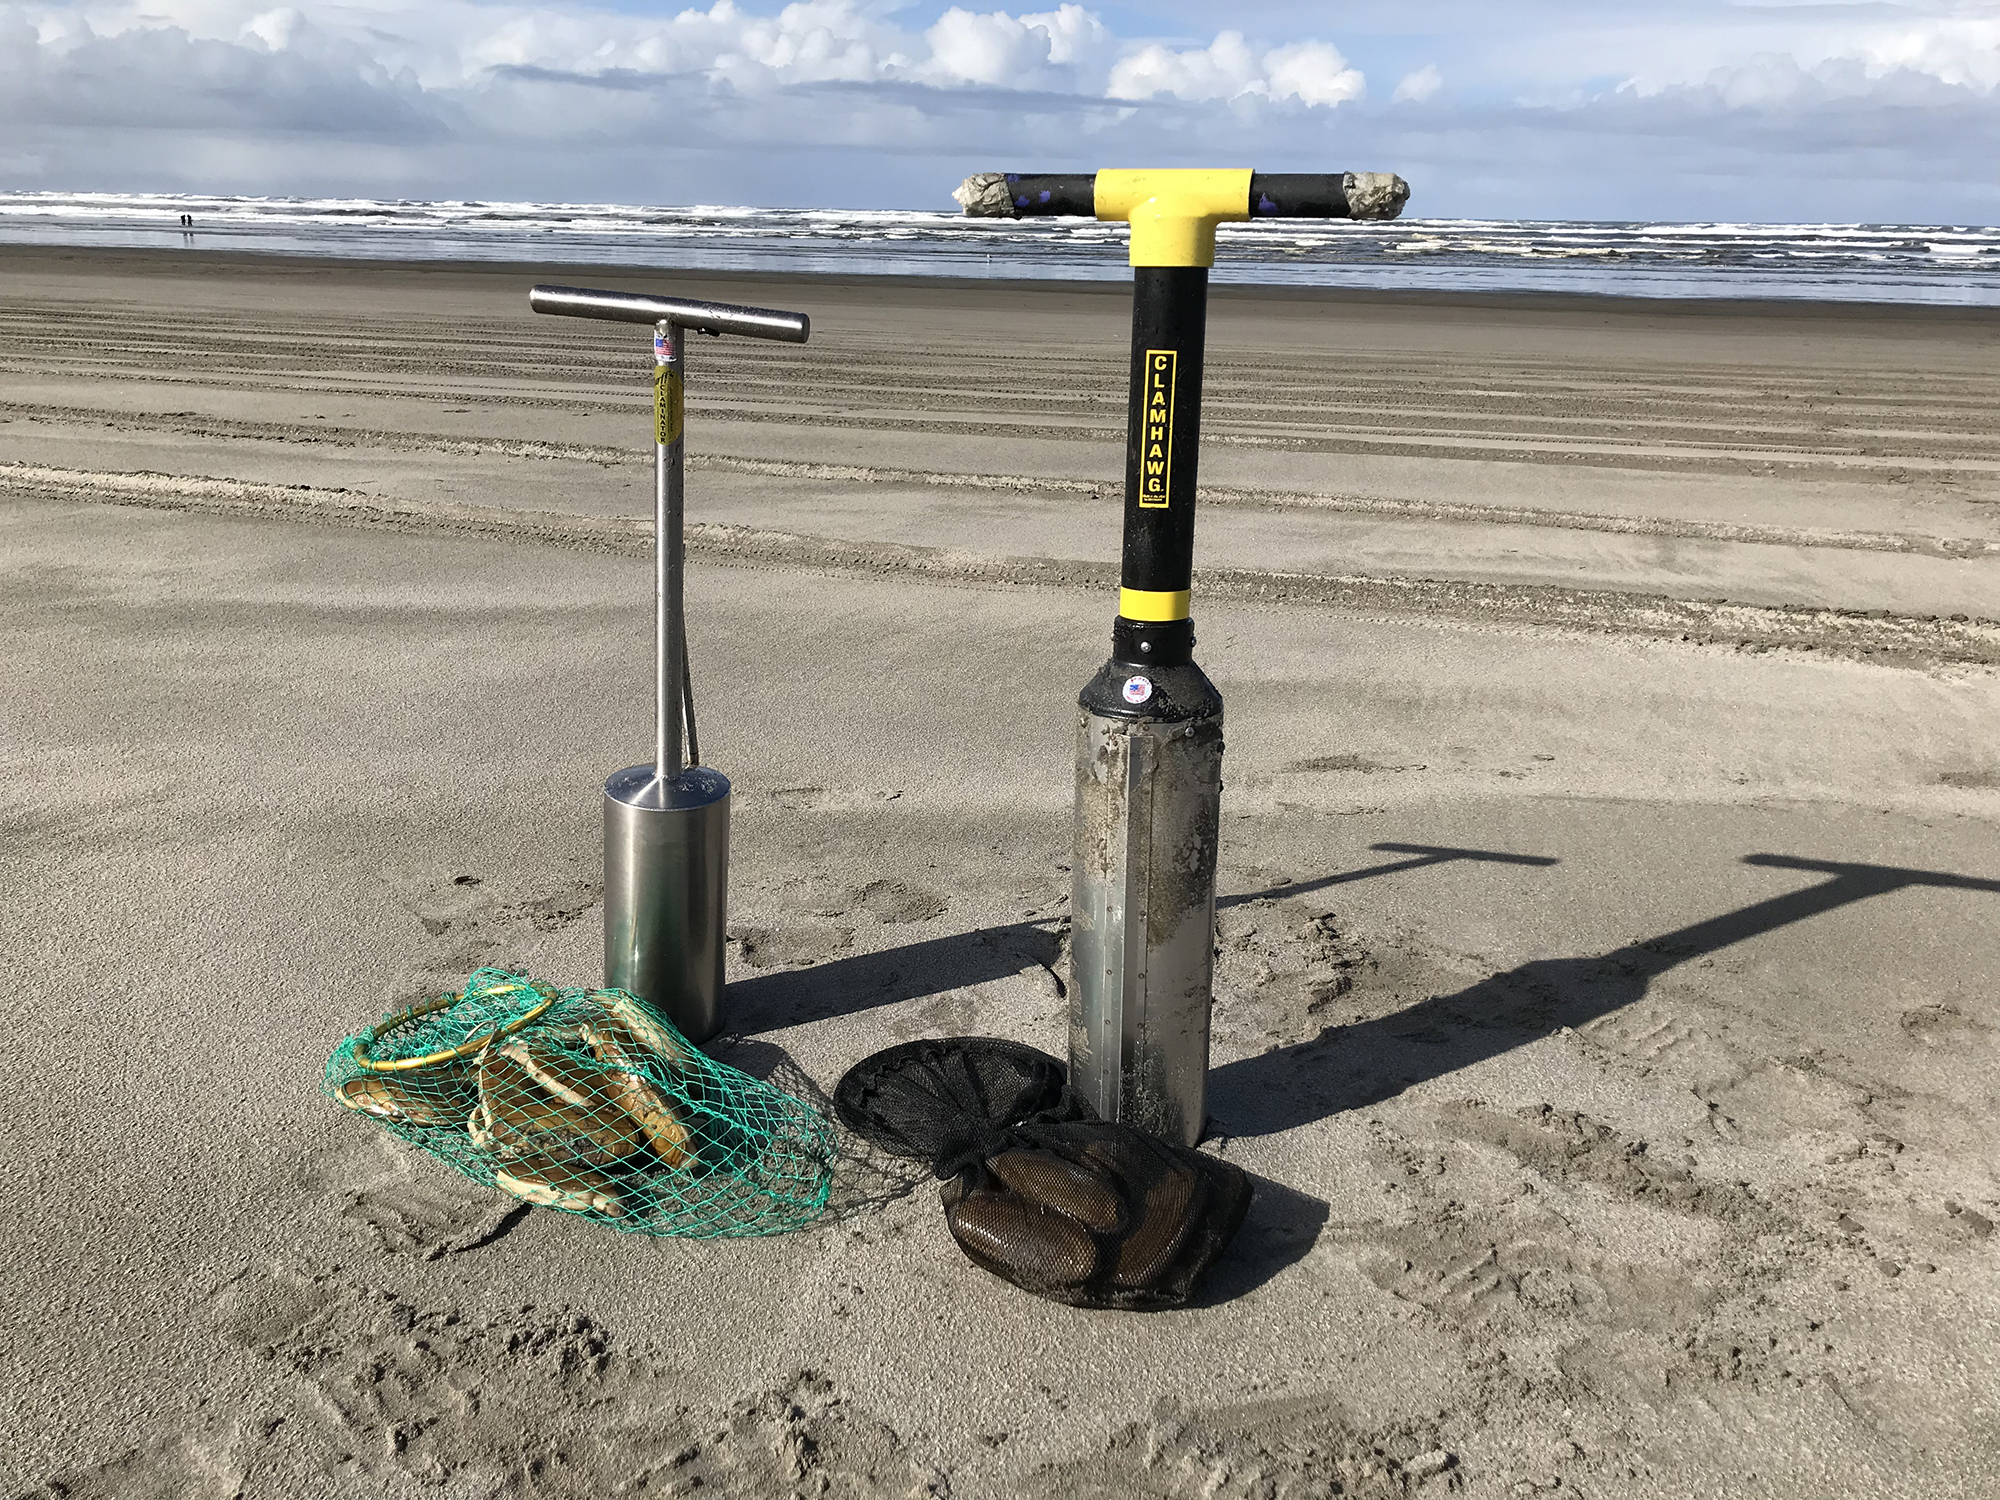 Oregon clam digging season gets started as Washington's ends - The